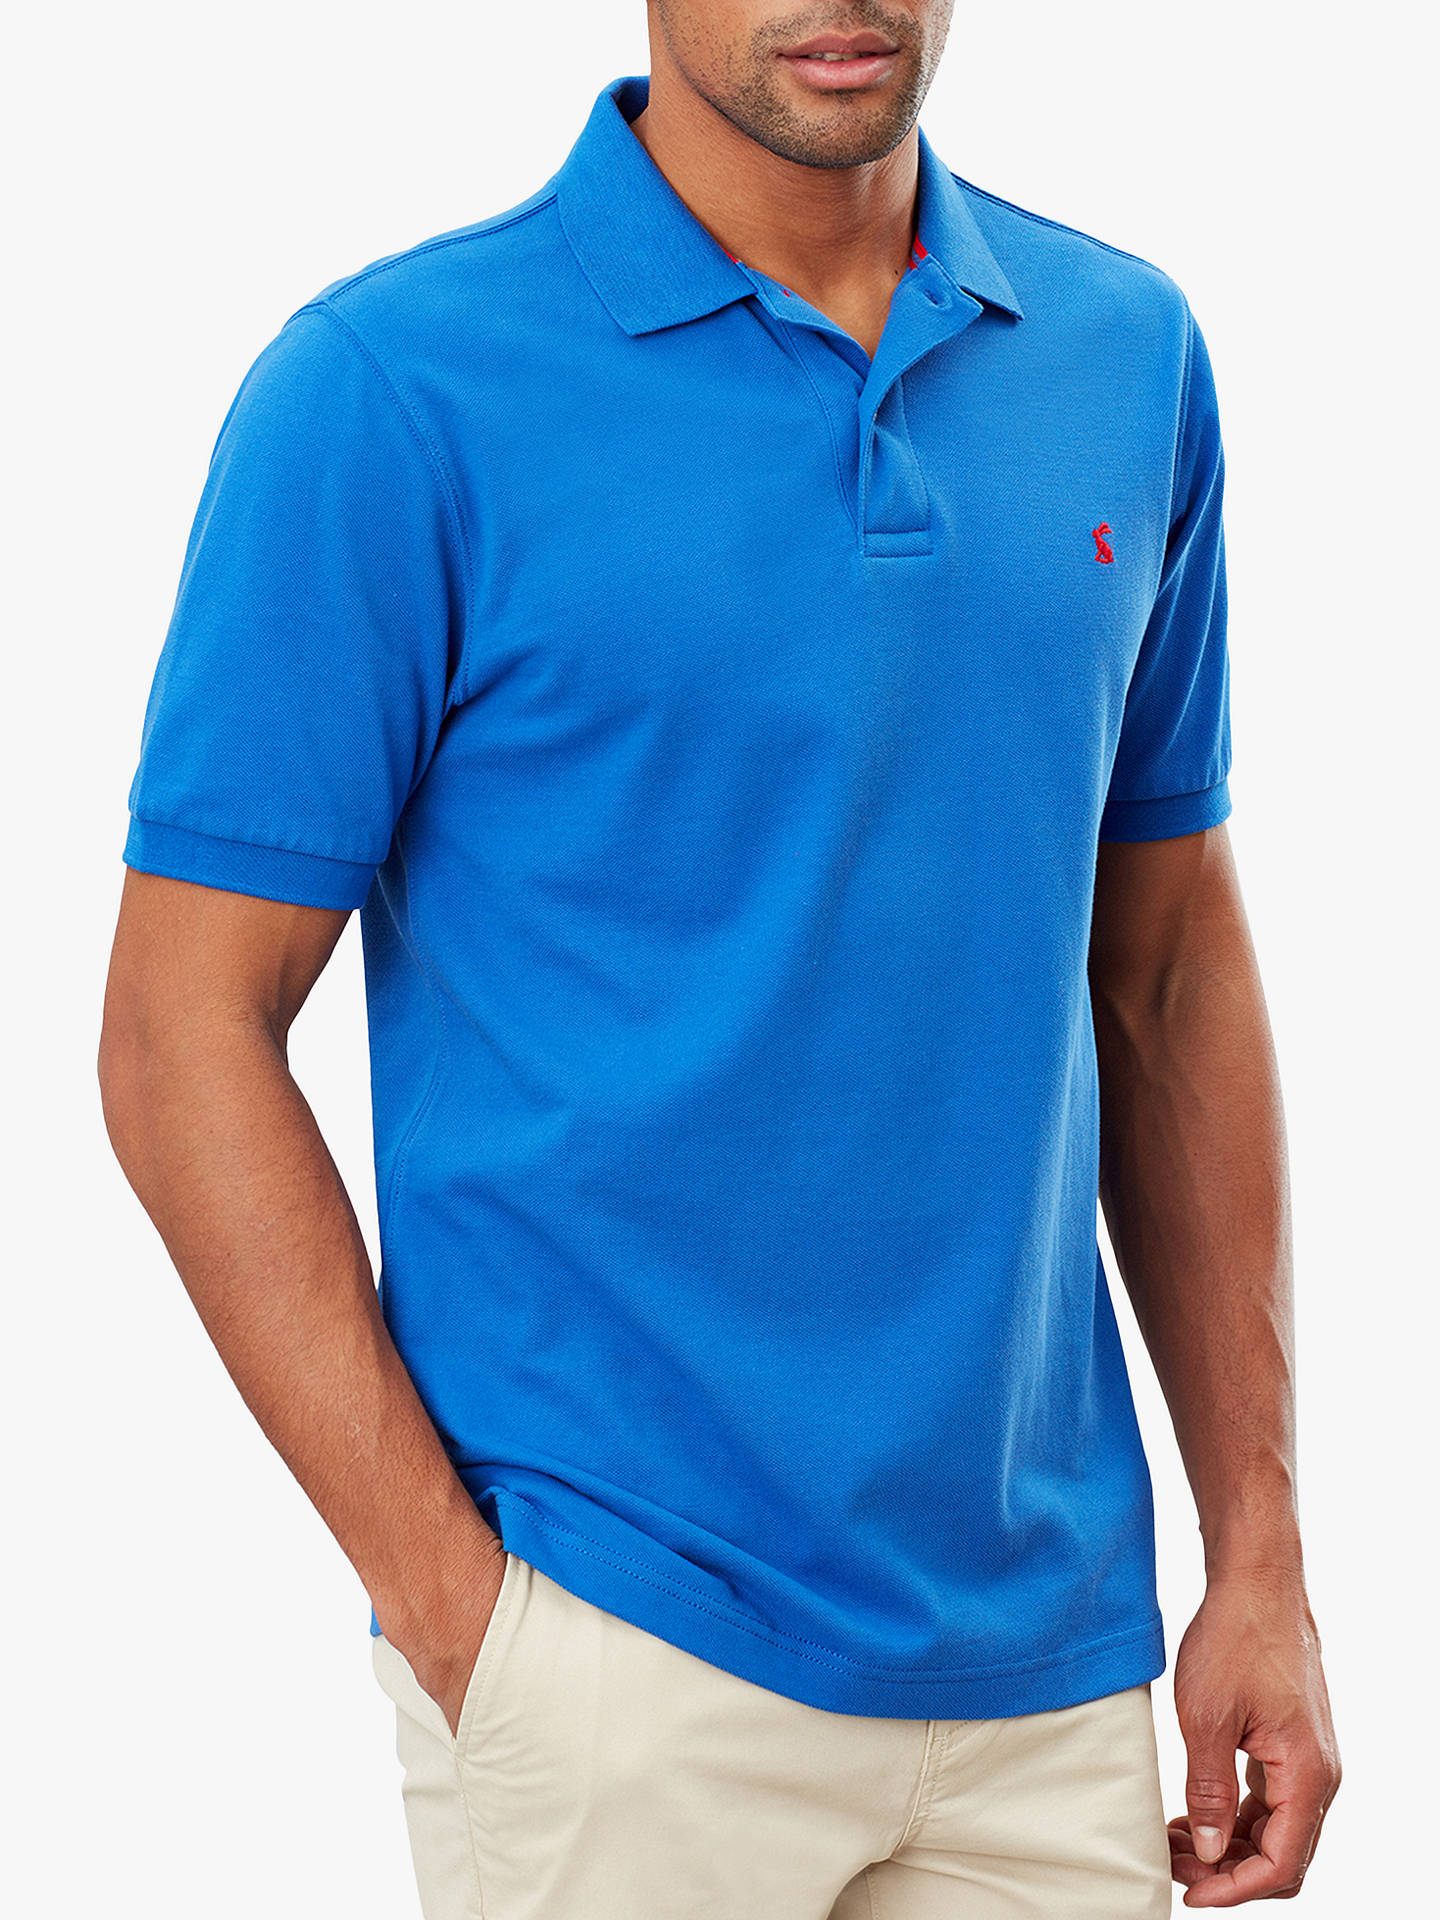 Joules Woody Long Sleeve Polo Shirt, Blue at John Lewis & Partners